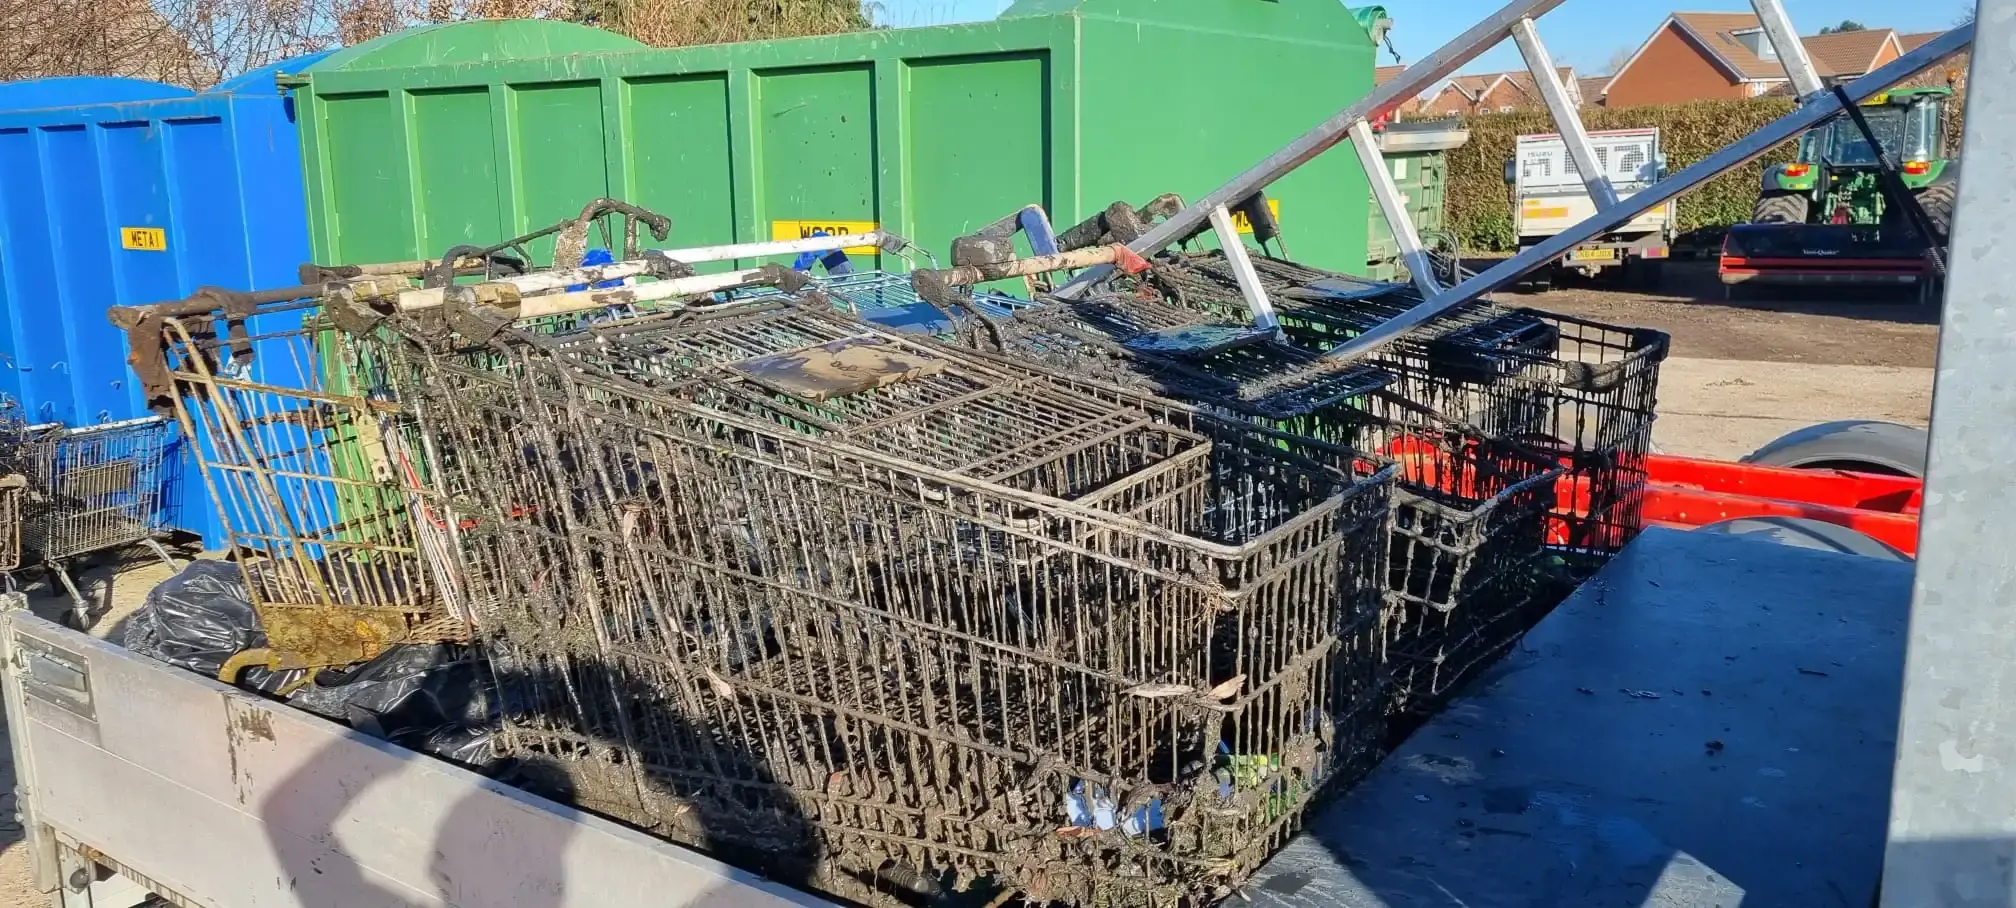 Rusted shopping trolleys pulled from river